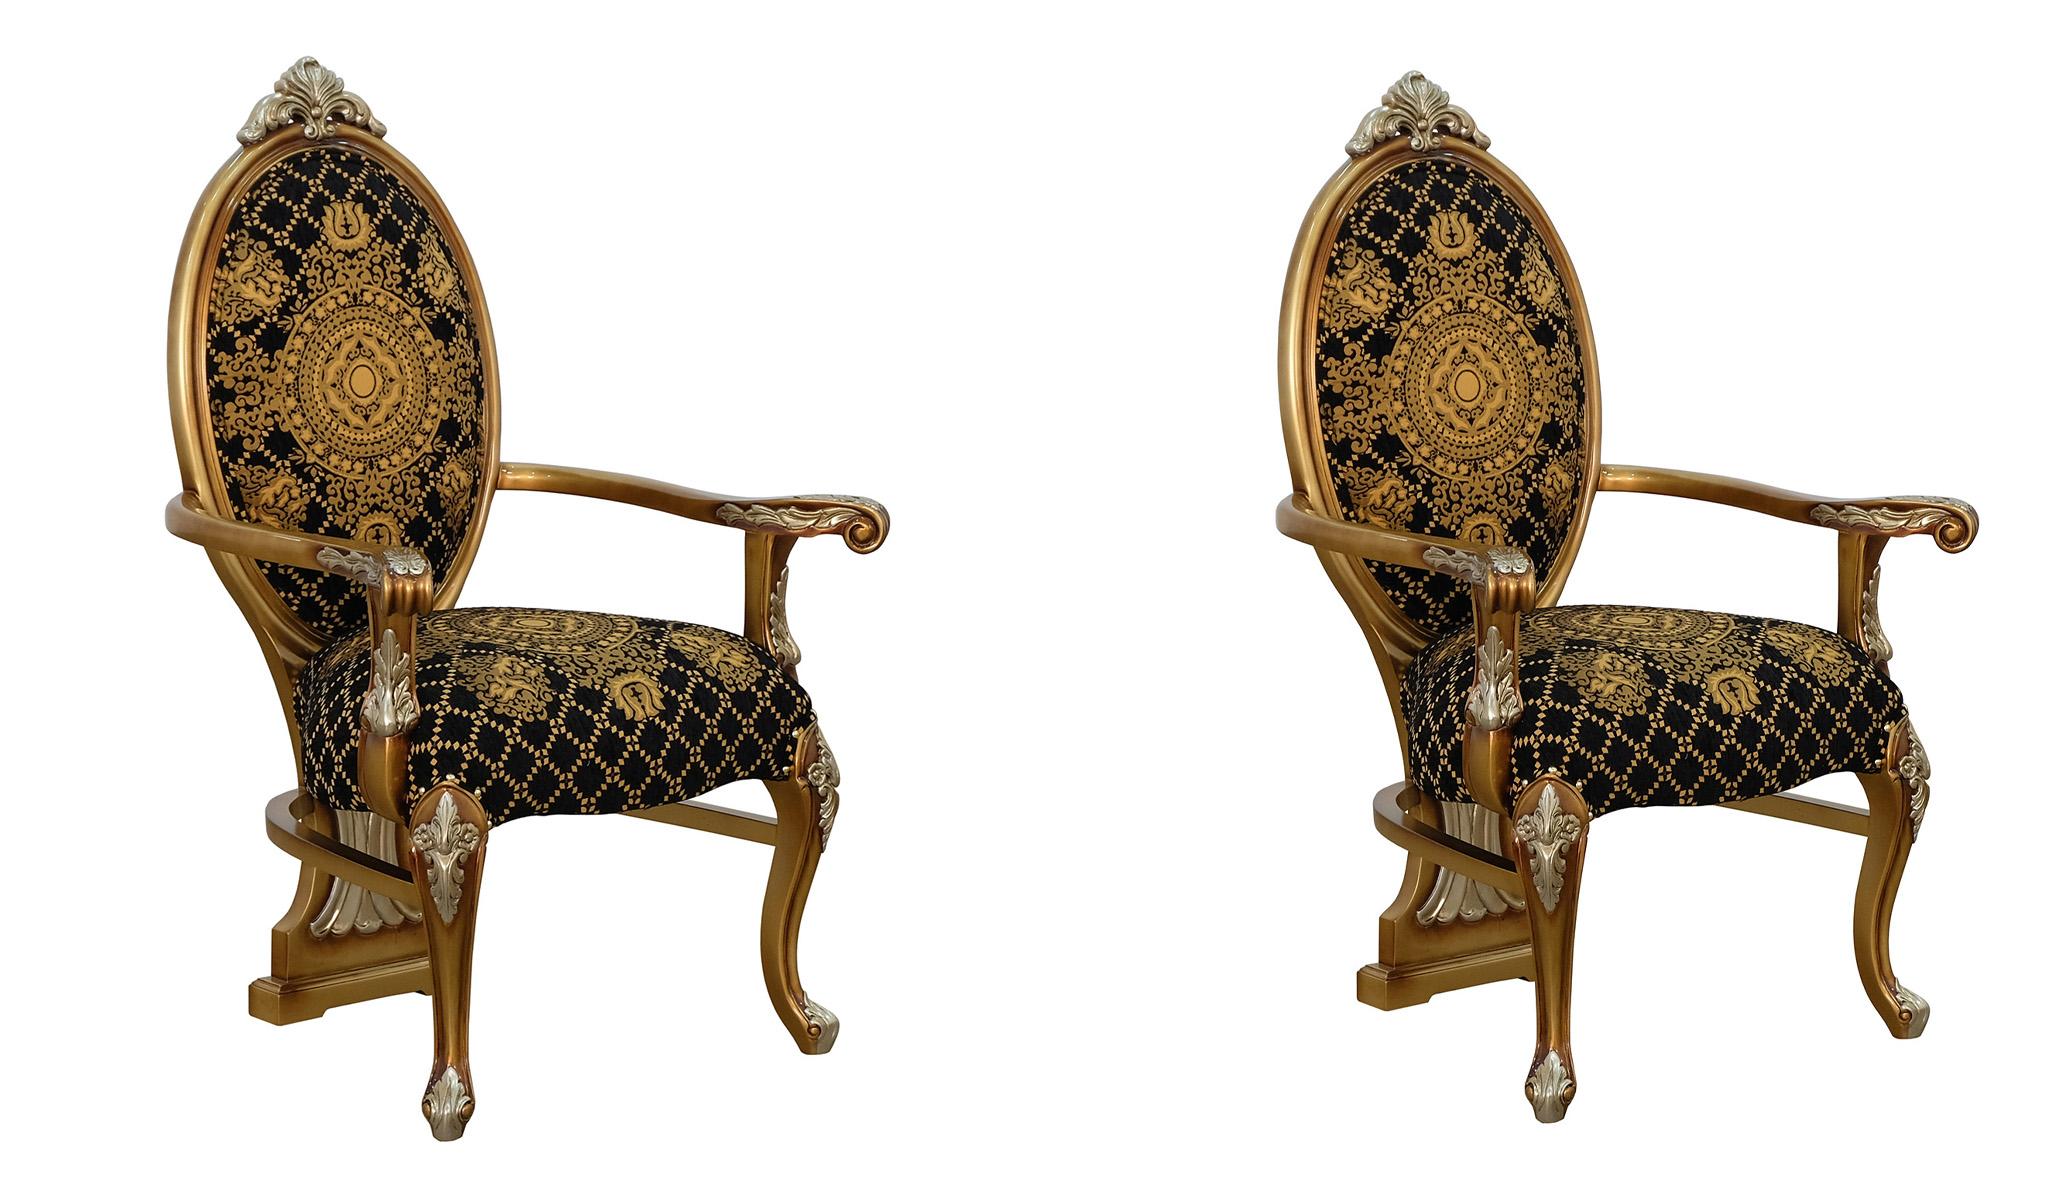 Classic, Traditional Dining Arm Chair Set EMPERADOR 42034-AC-Set-2 in Silver, Gold, Black Fabric